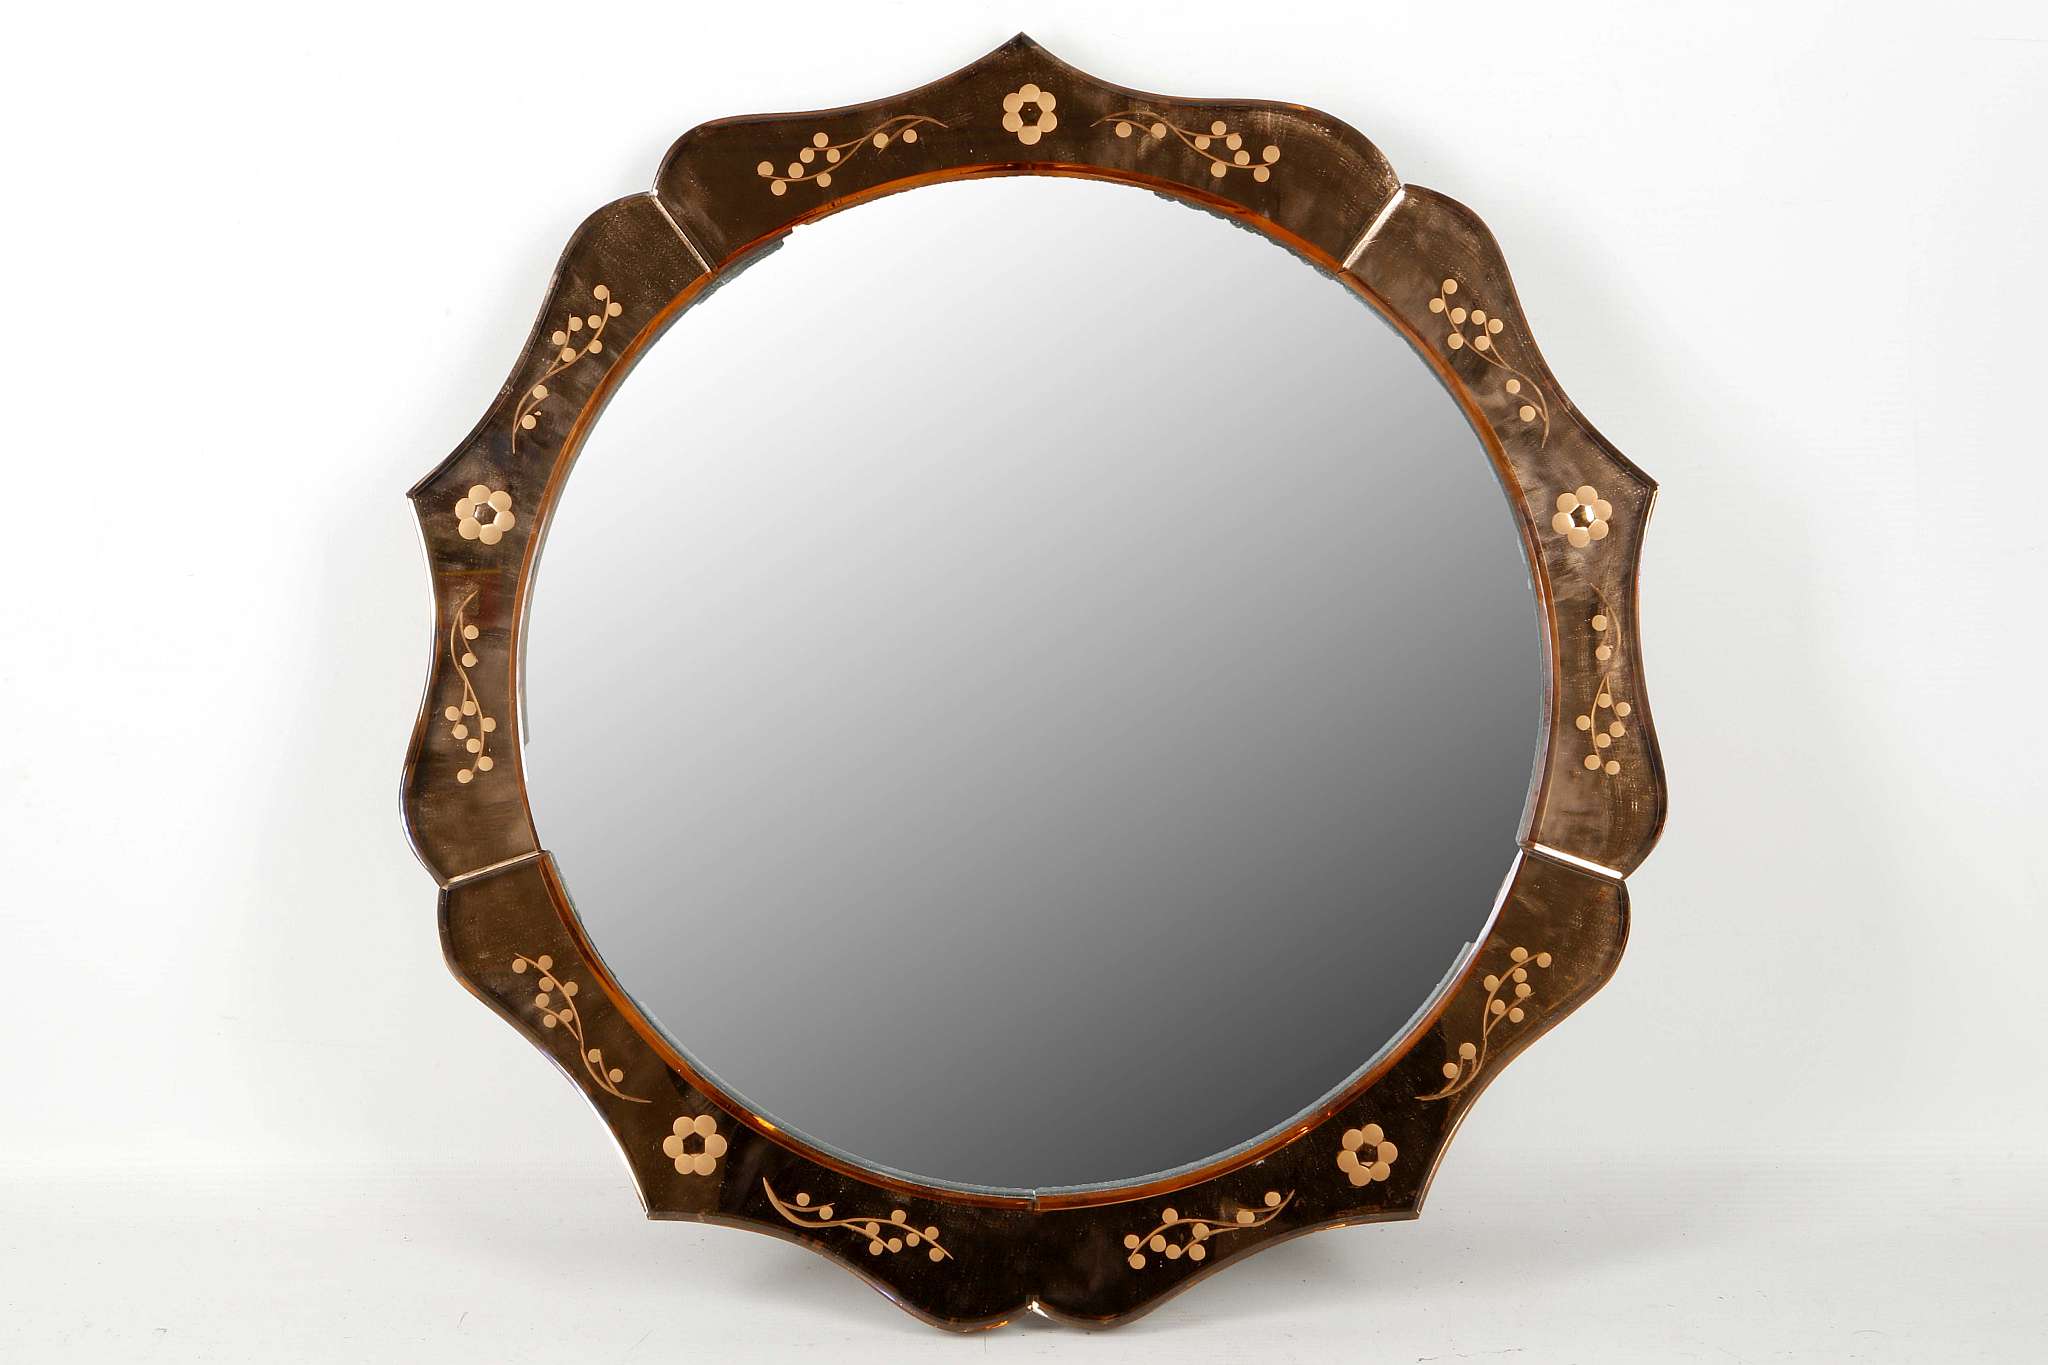 An Art Deco, multi arched top mirror with peach glass slips, a convex mirror with peach glass